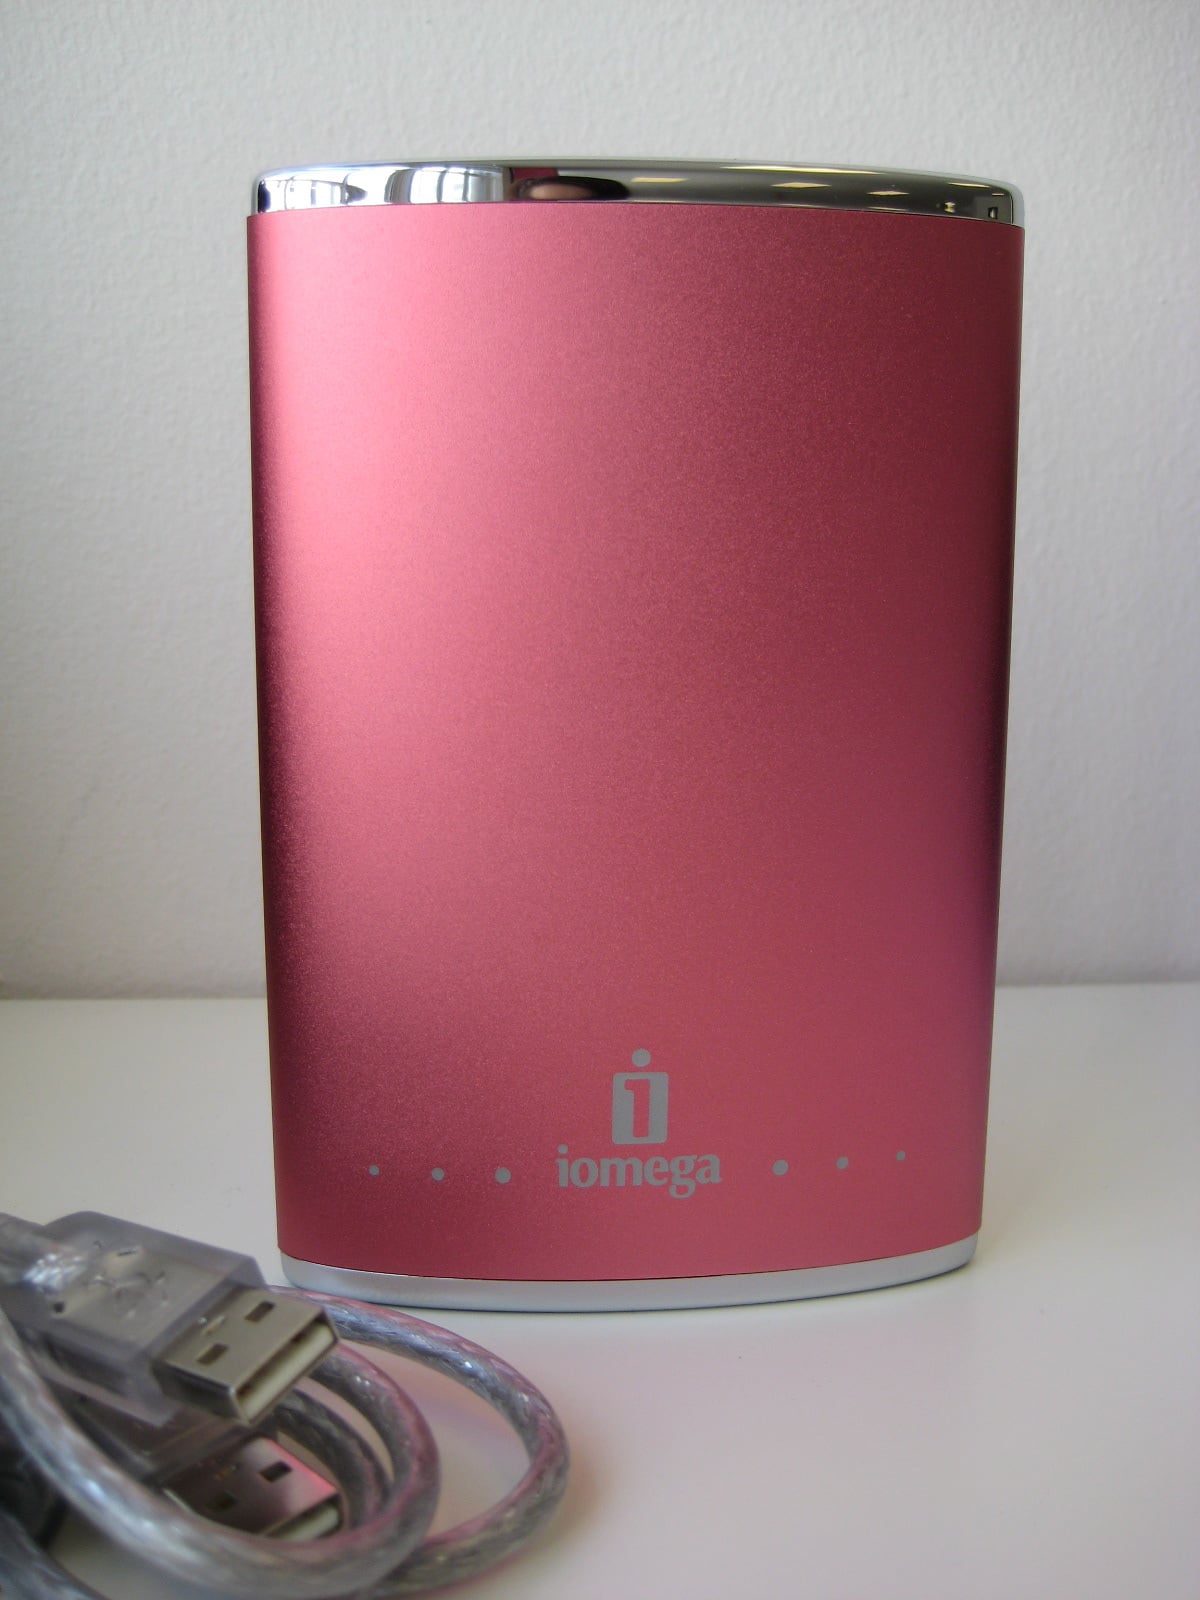 Flask Style Pink Portable Hard Drive by Iomega